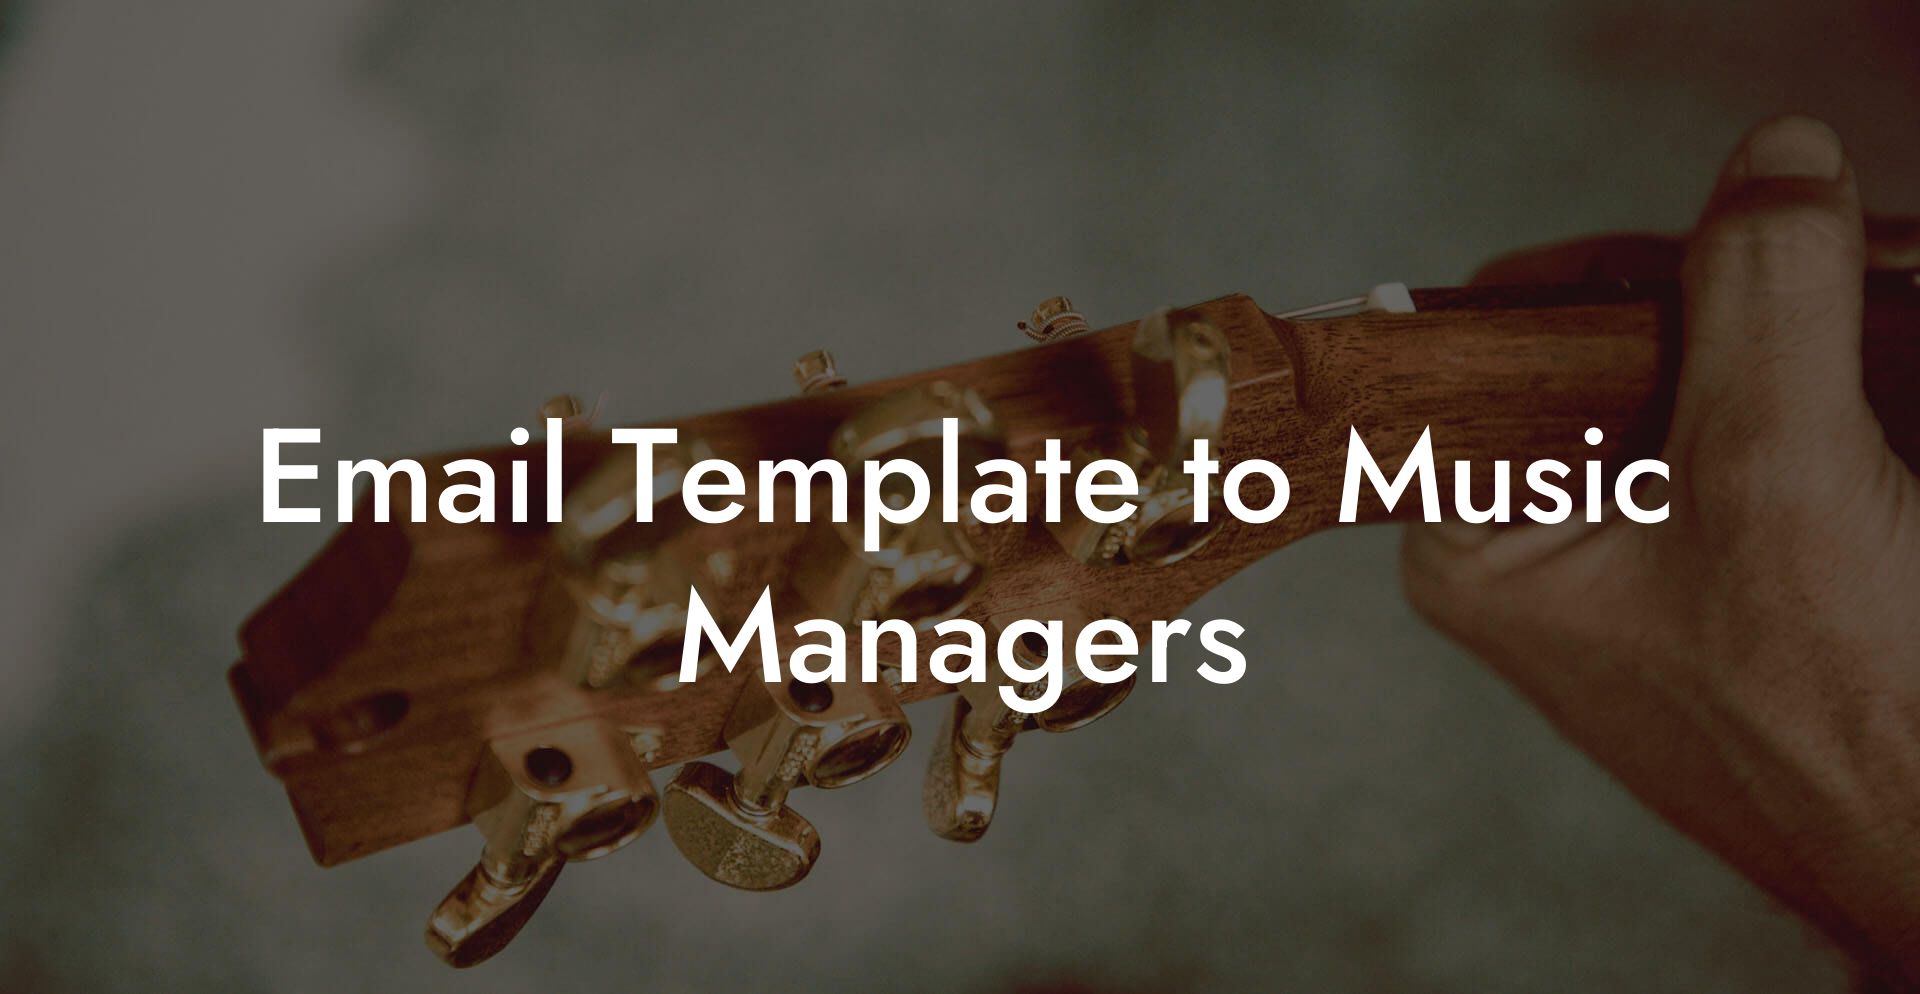 Email Template to Music Managers